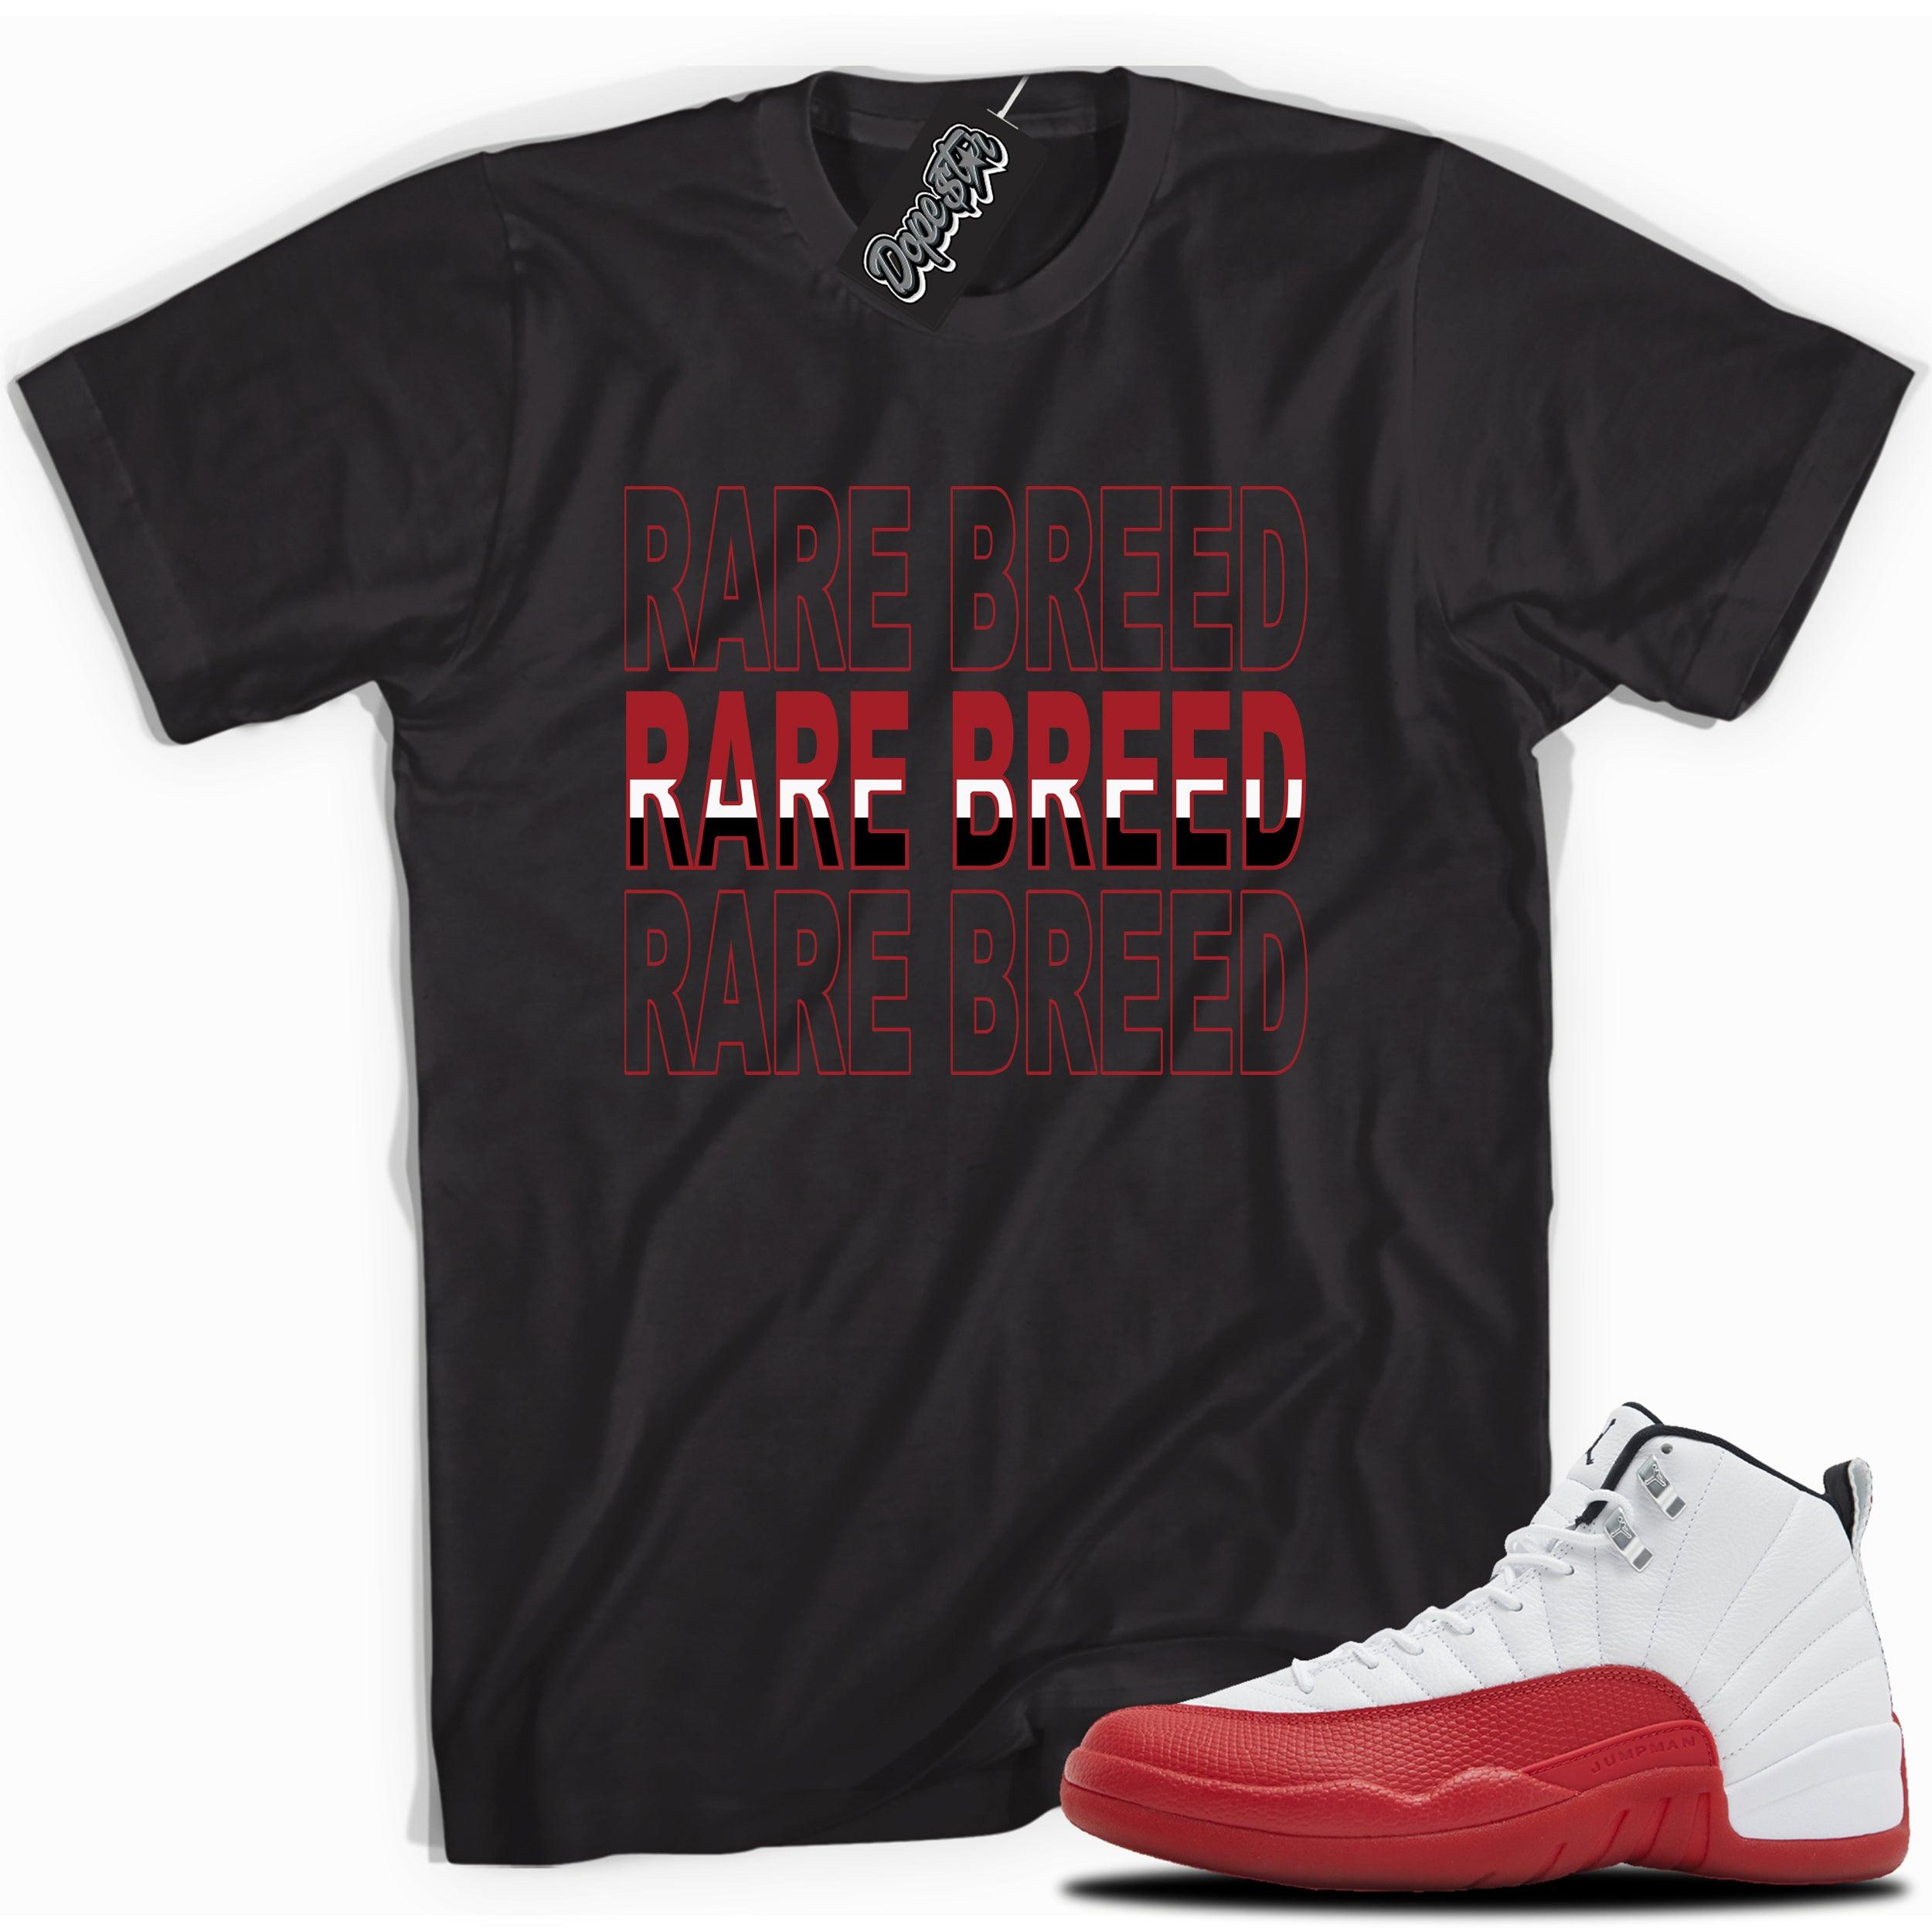 Cool Black graphic tee with “RARE BREED” print, that perfectly matches Air Jordan 12 Retro Cherry Red 2023 red and white sneakers